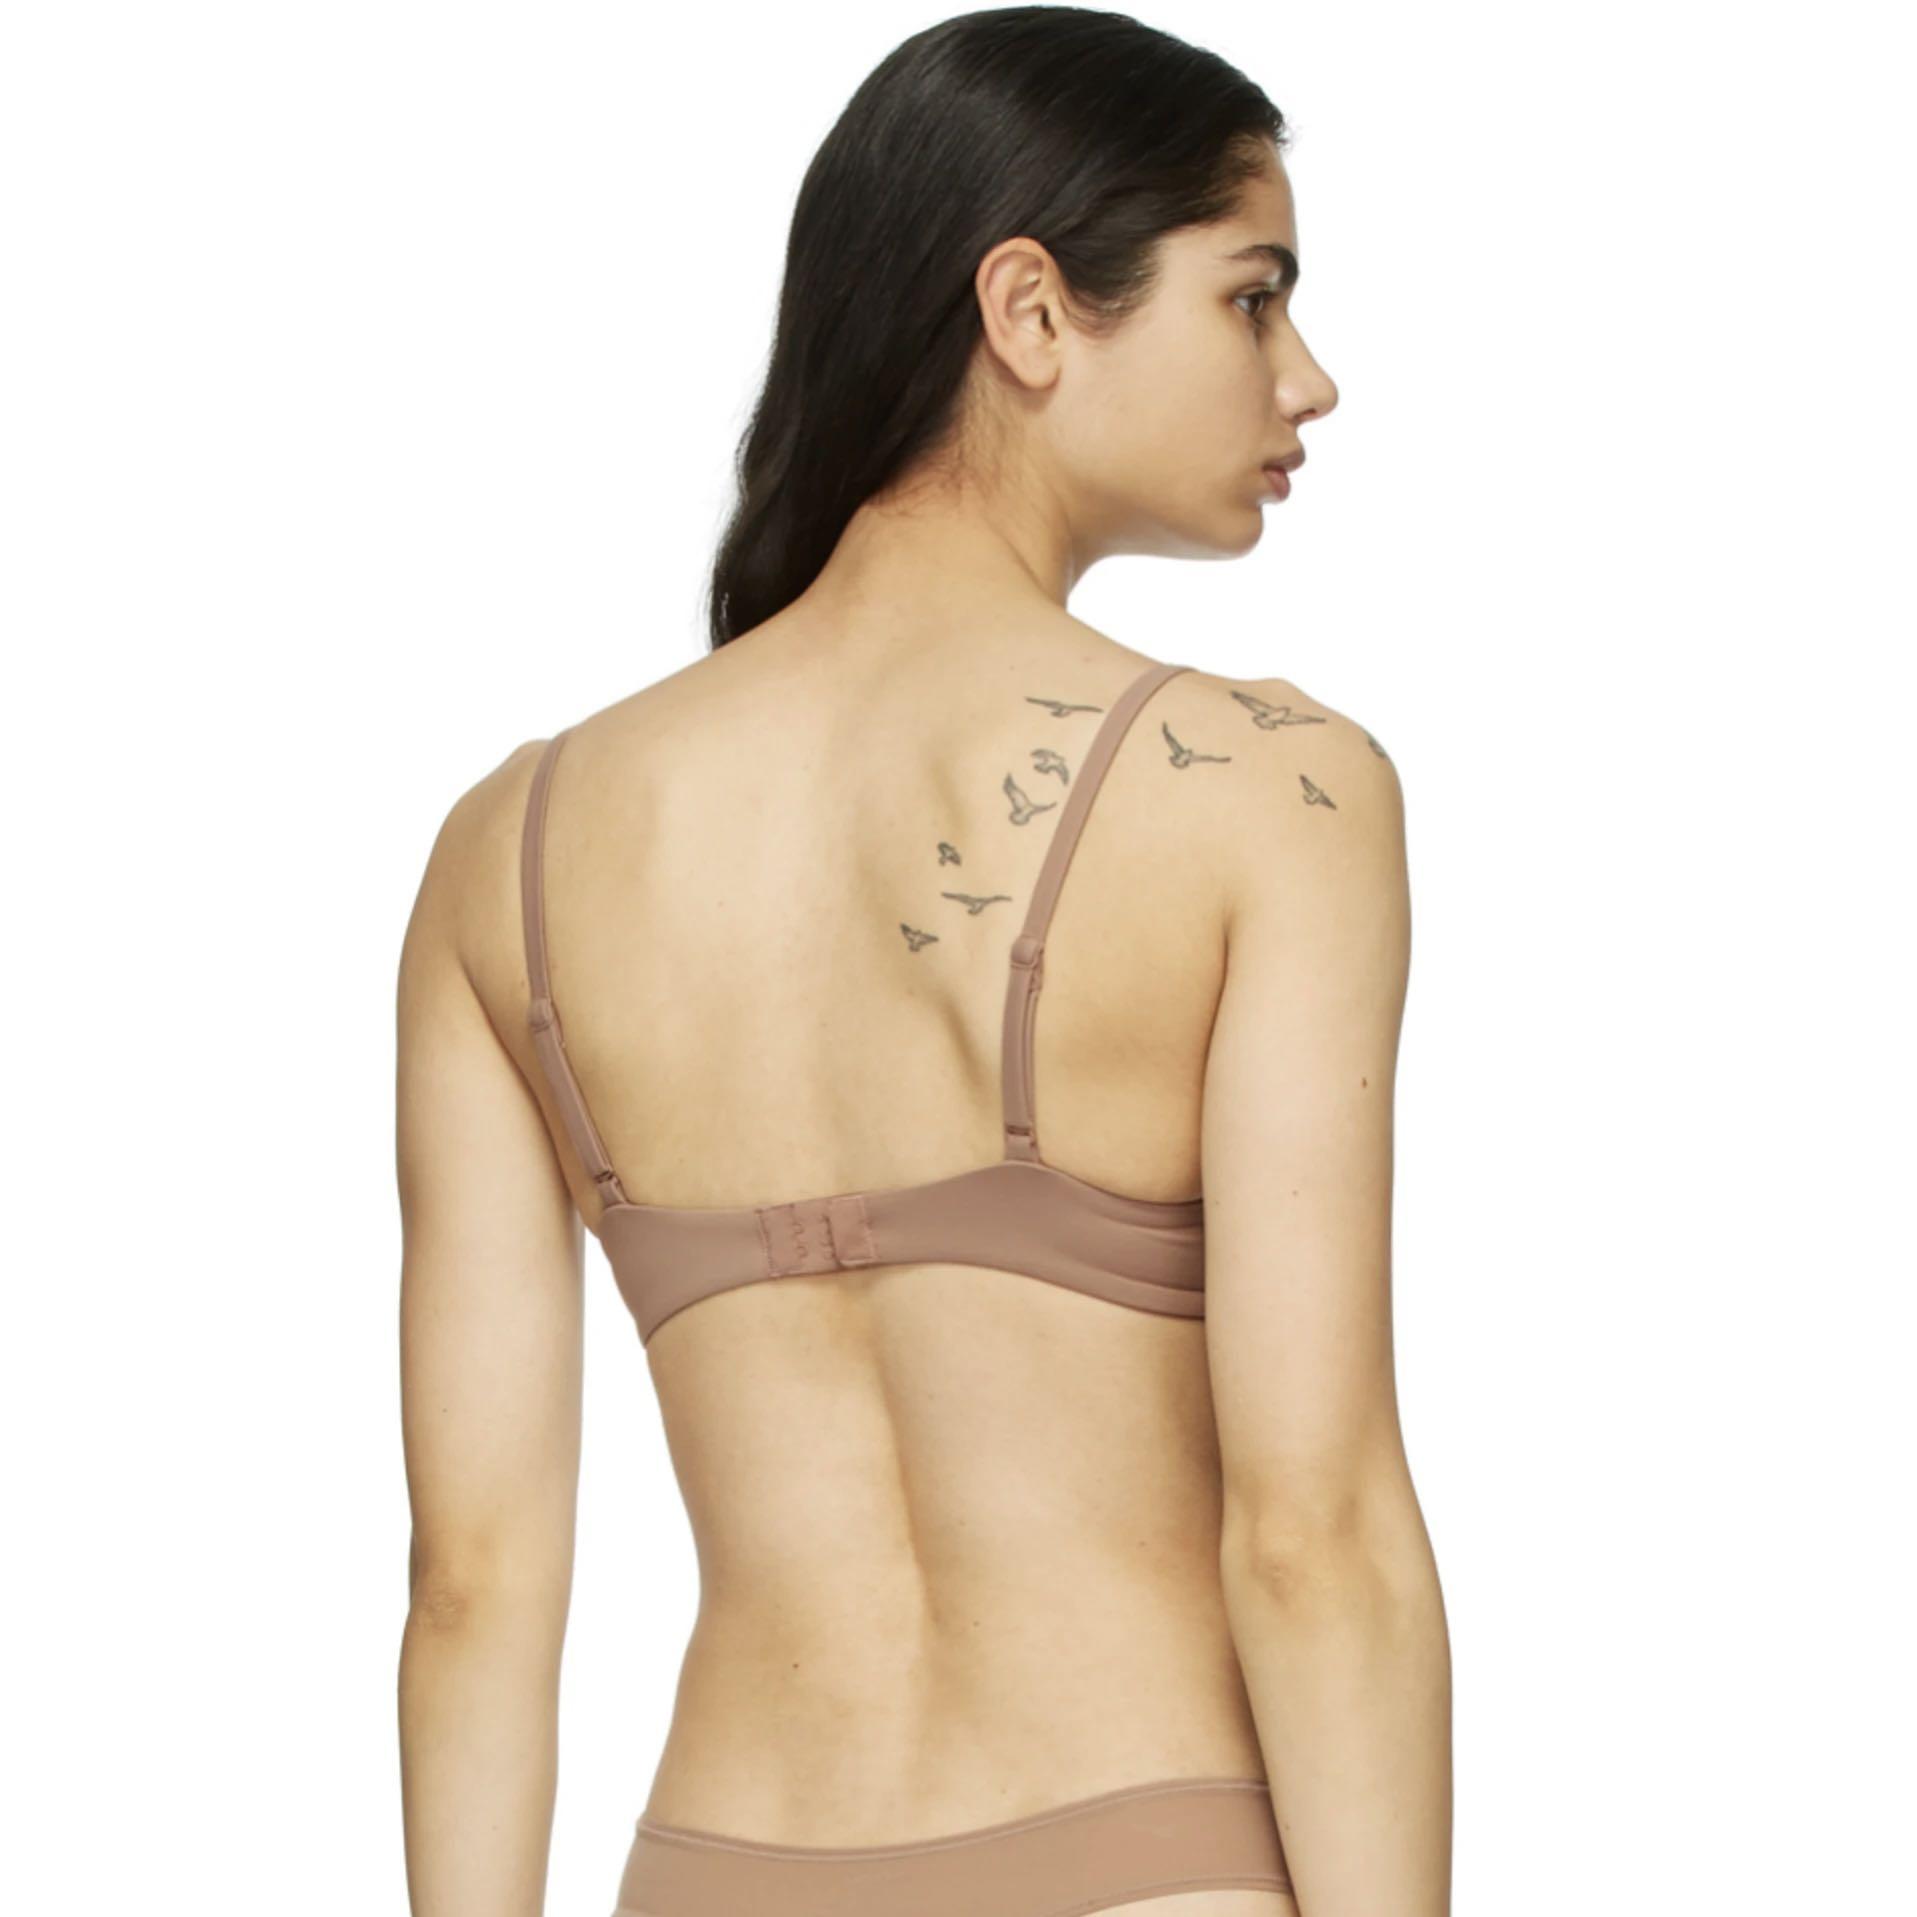 NEW Skims Fits Everybody T-shirt Push Up Bra in Sienna, size 32A